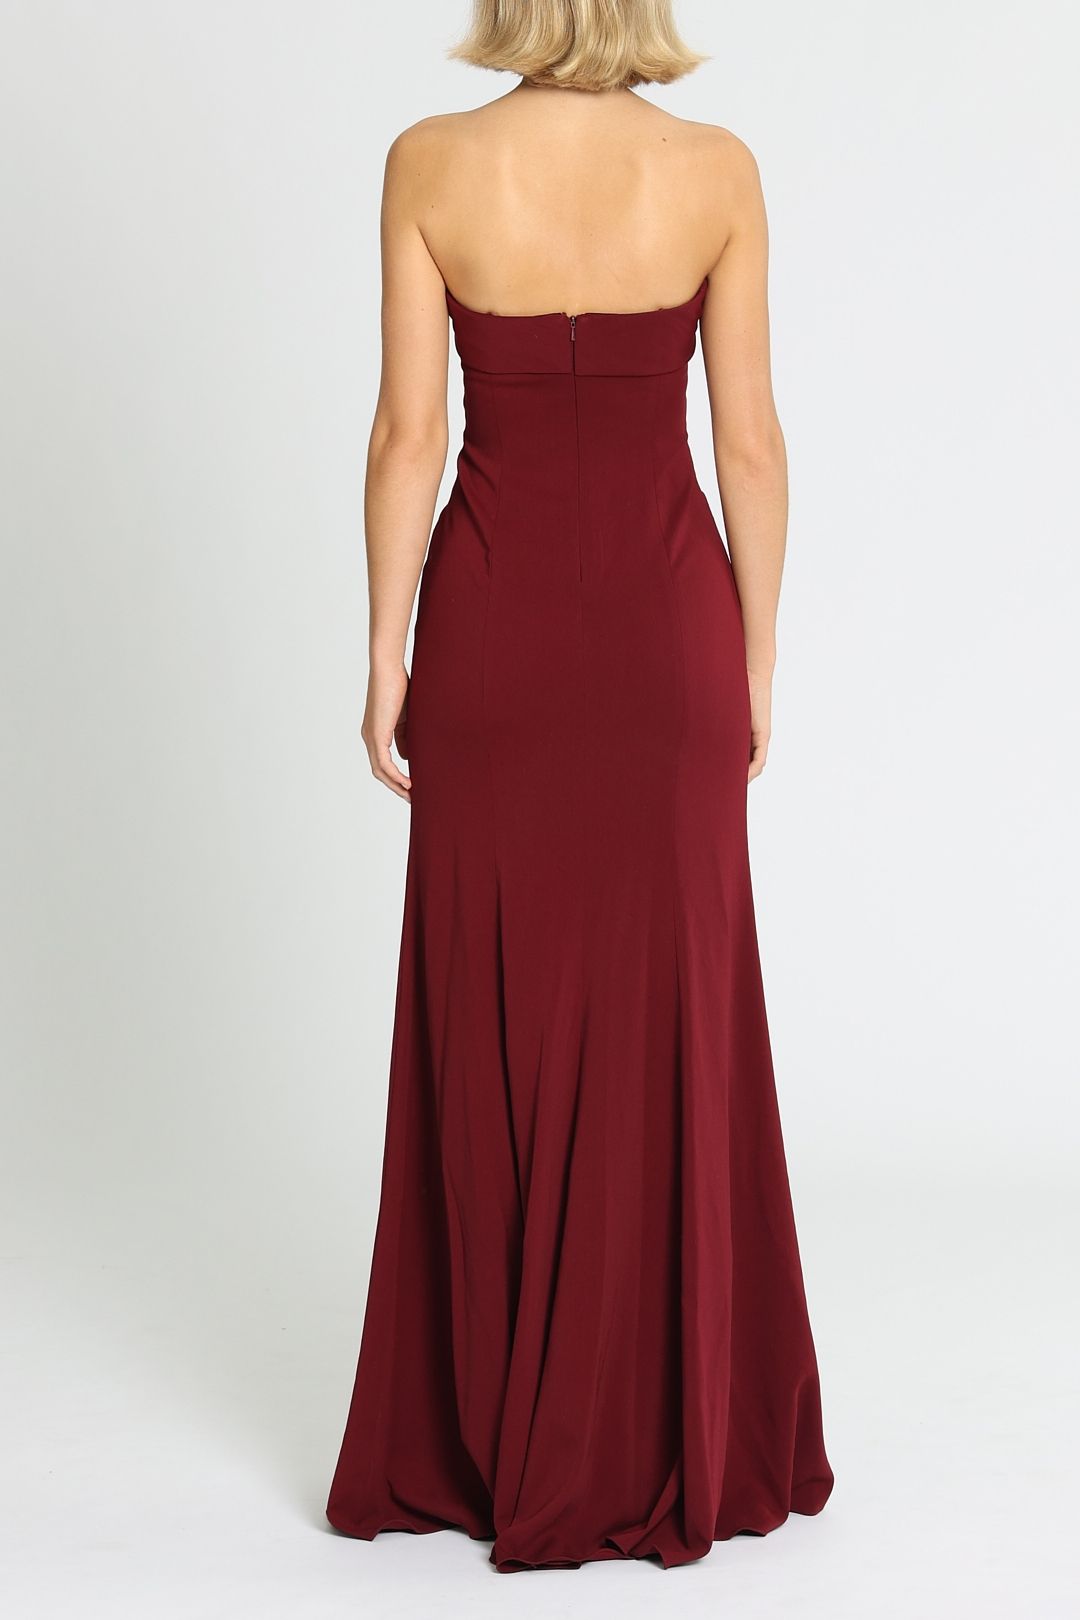 Jay Godfrey Cambridge Gown Bordeaux Fit and Flare